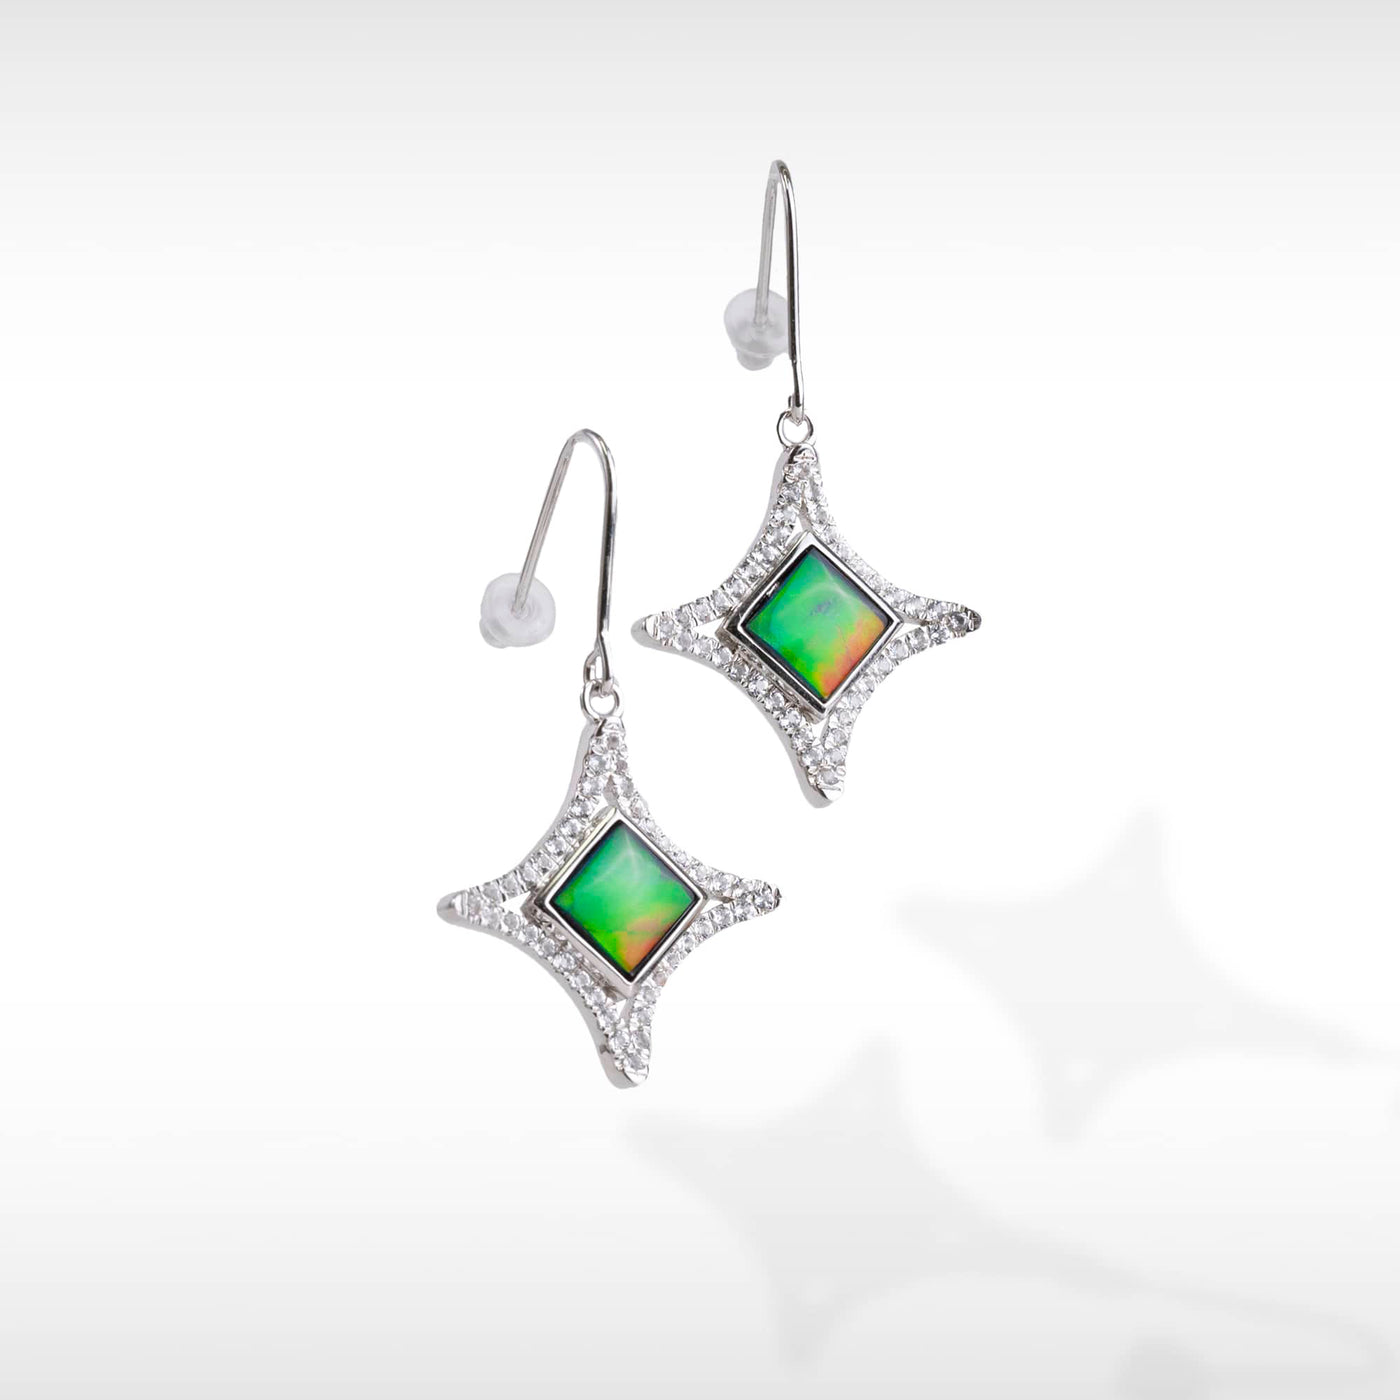 Women's Sterling Silver Ammolite Earrings with White Topaz Accent